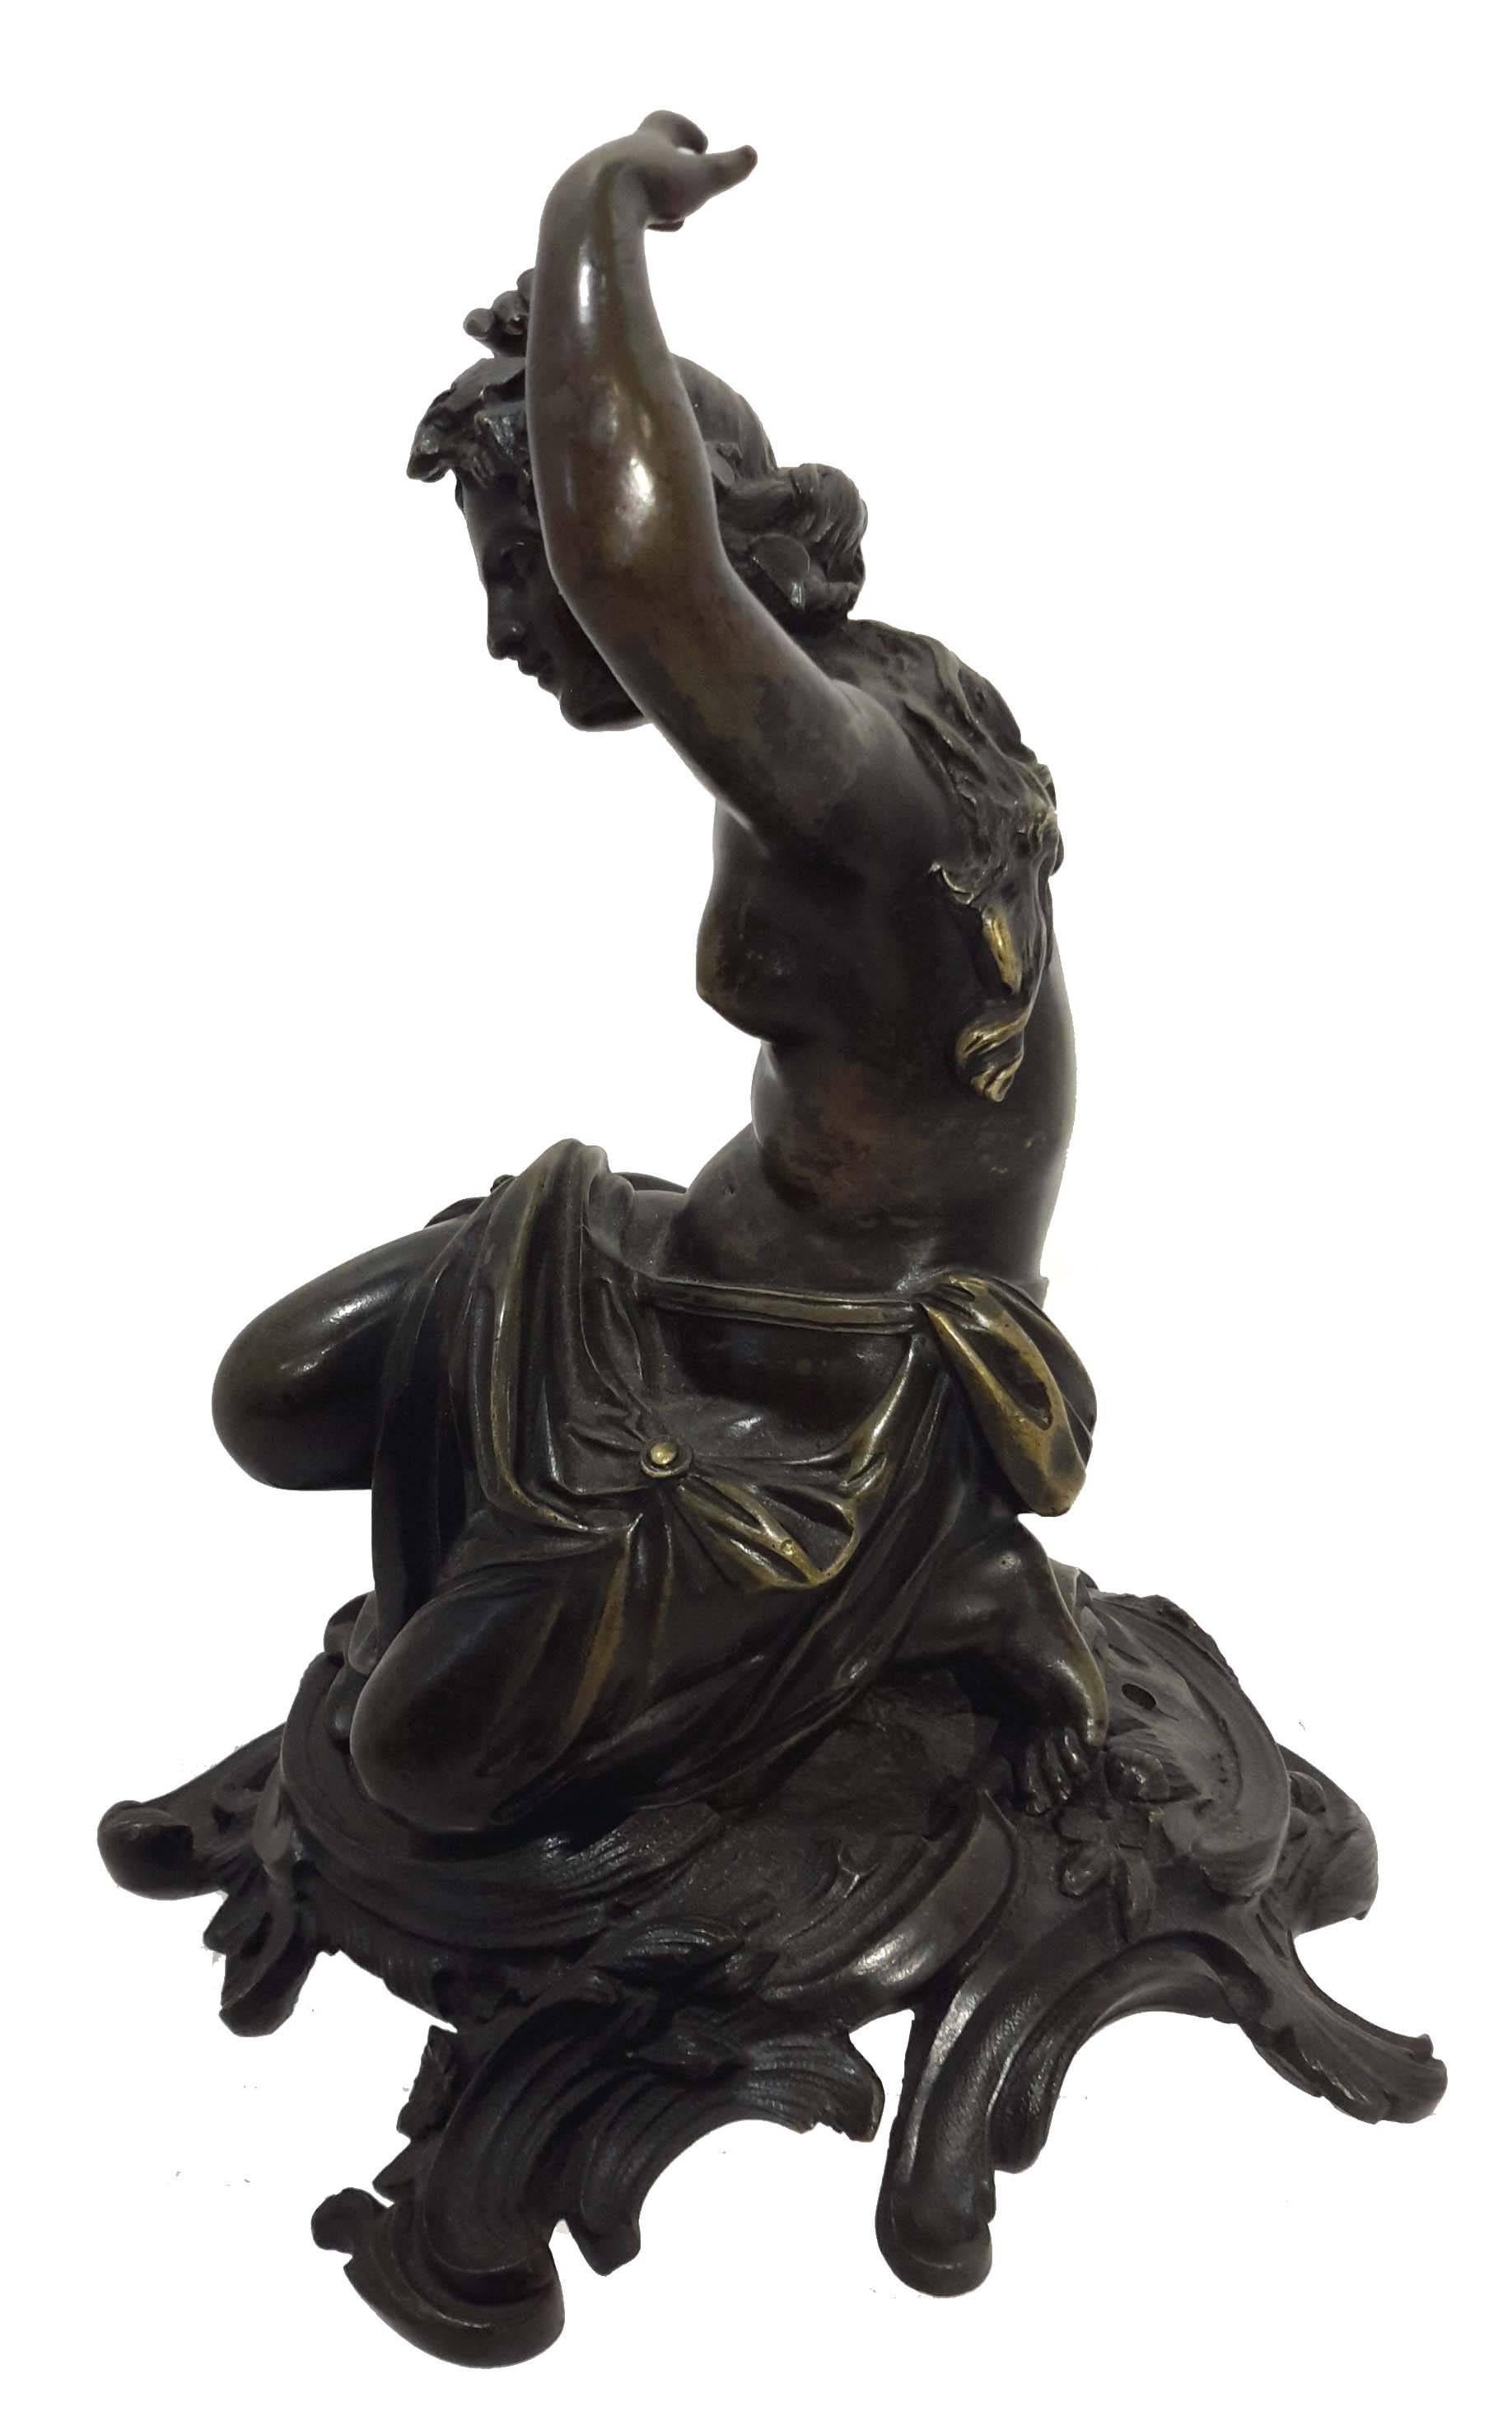 French circa mid-19th century. Beautifully cast bronze of a bacchante sitting and with raised hands dancing. Medium brown patina. on a Rococo style base.